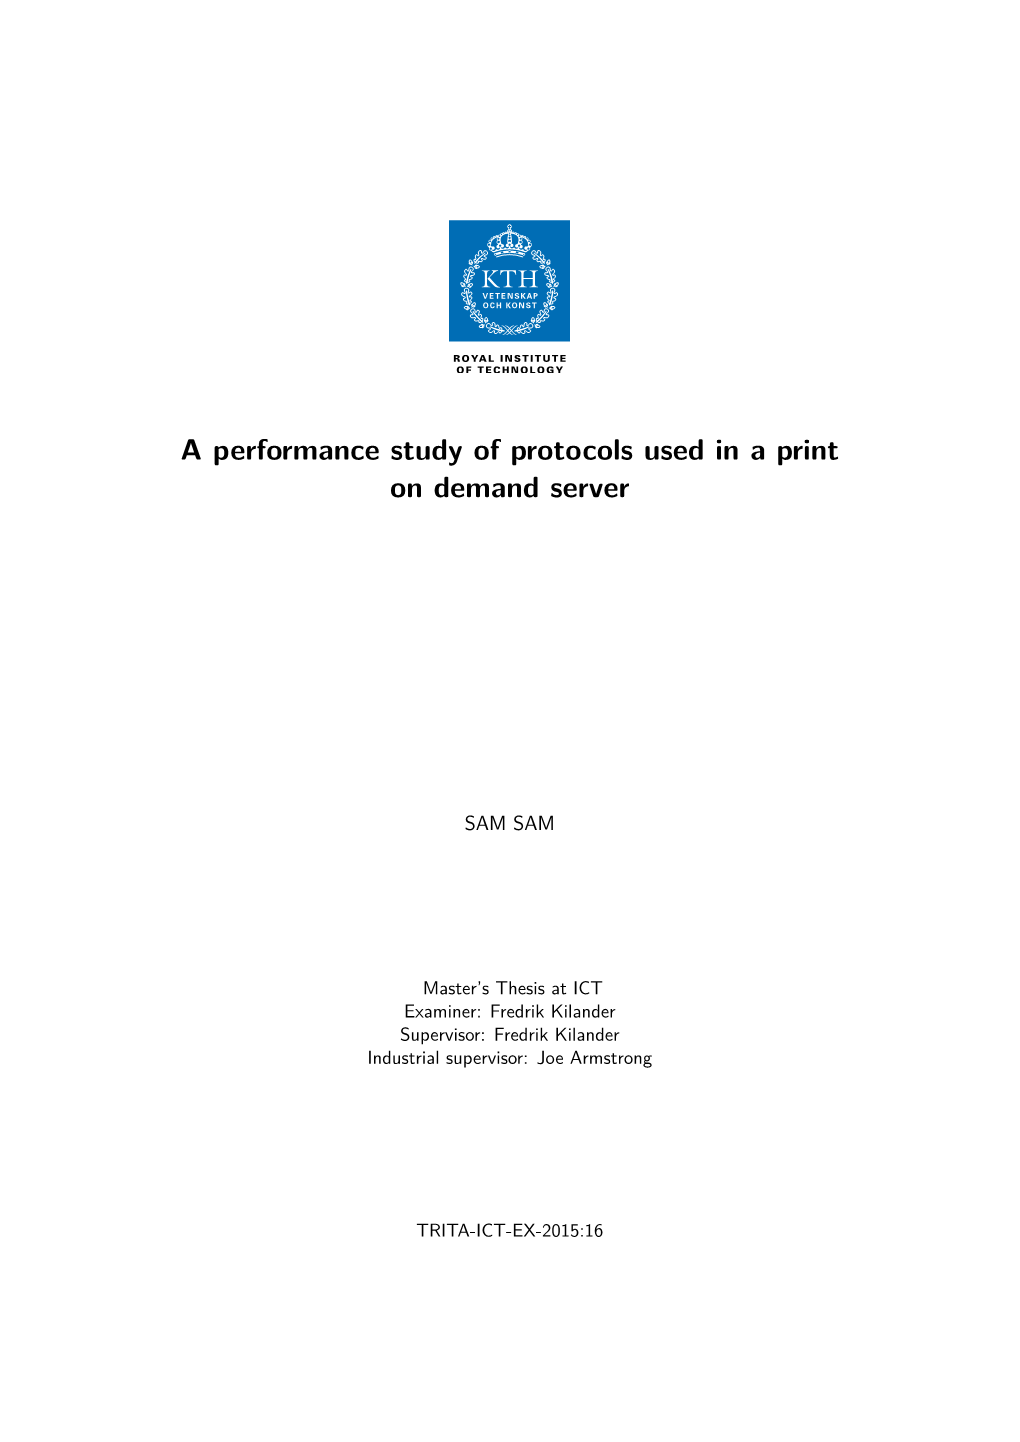 A Performance Study of Protocols Used in a Print on Demand Server